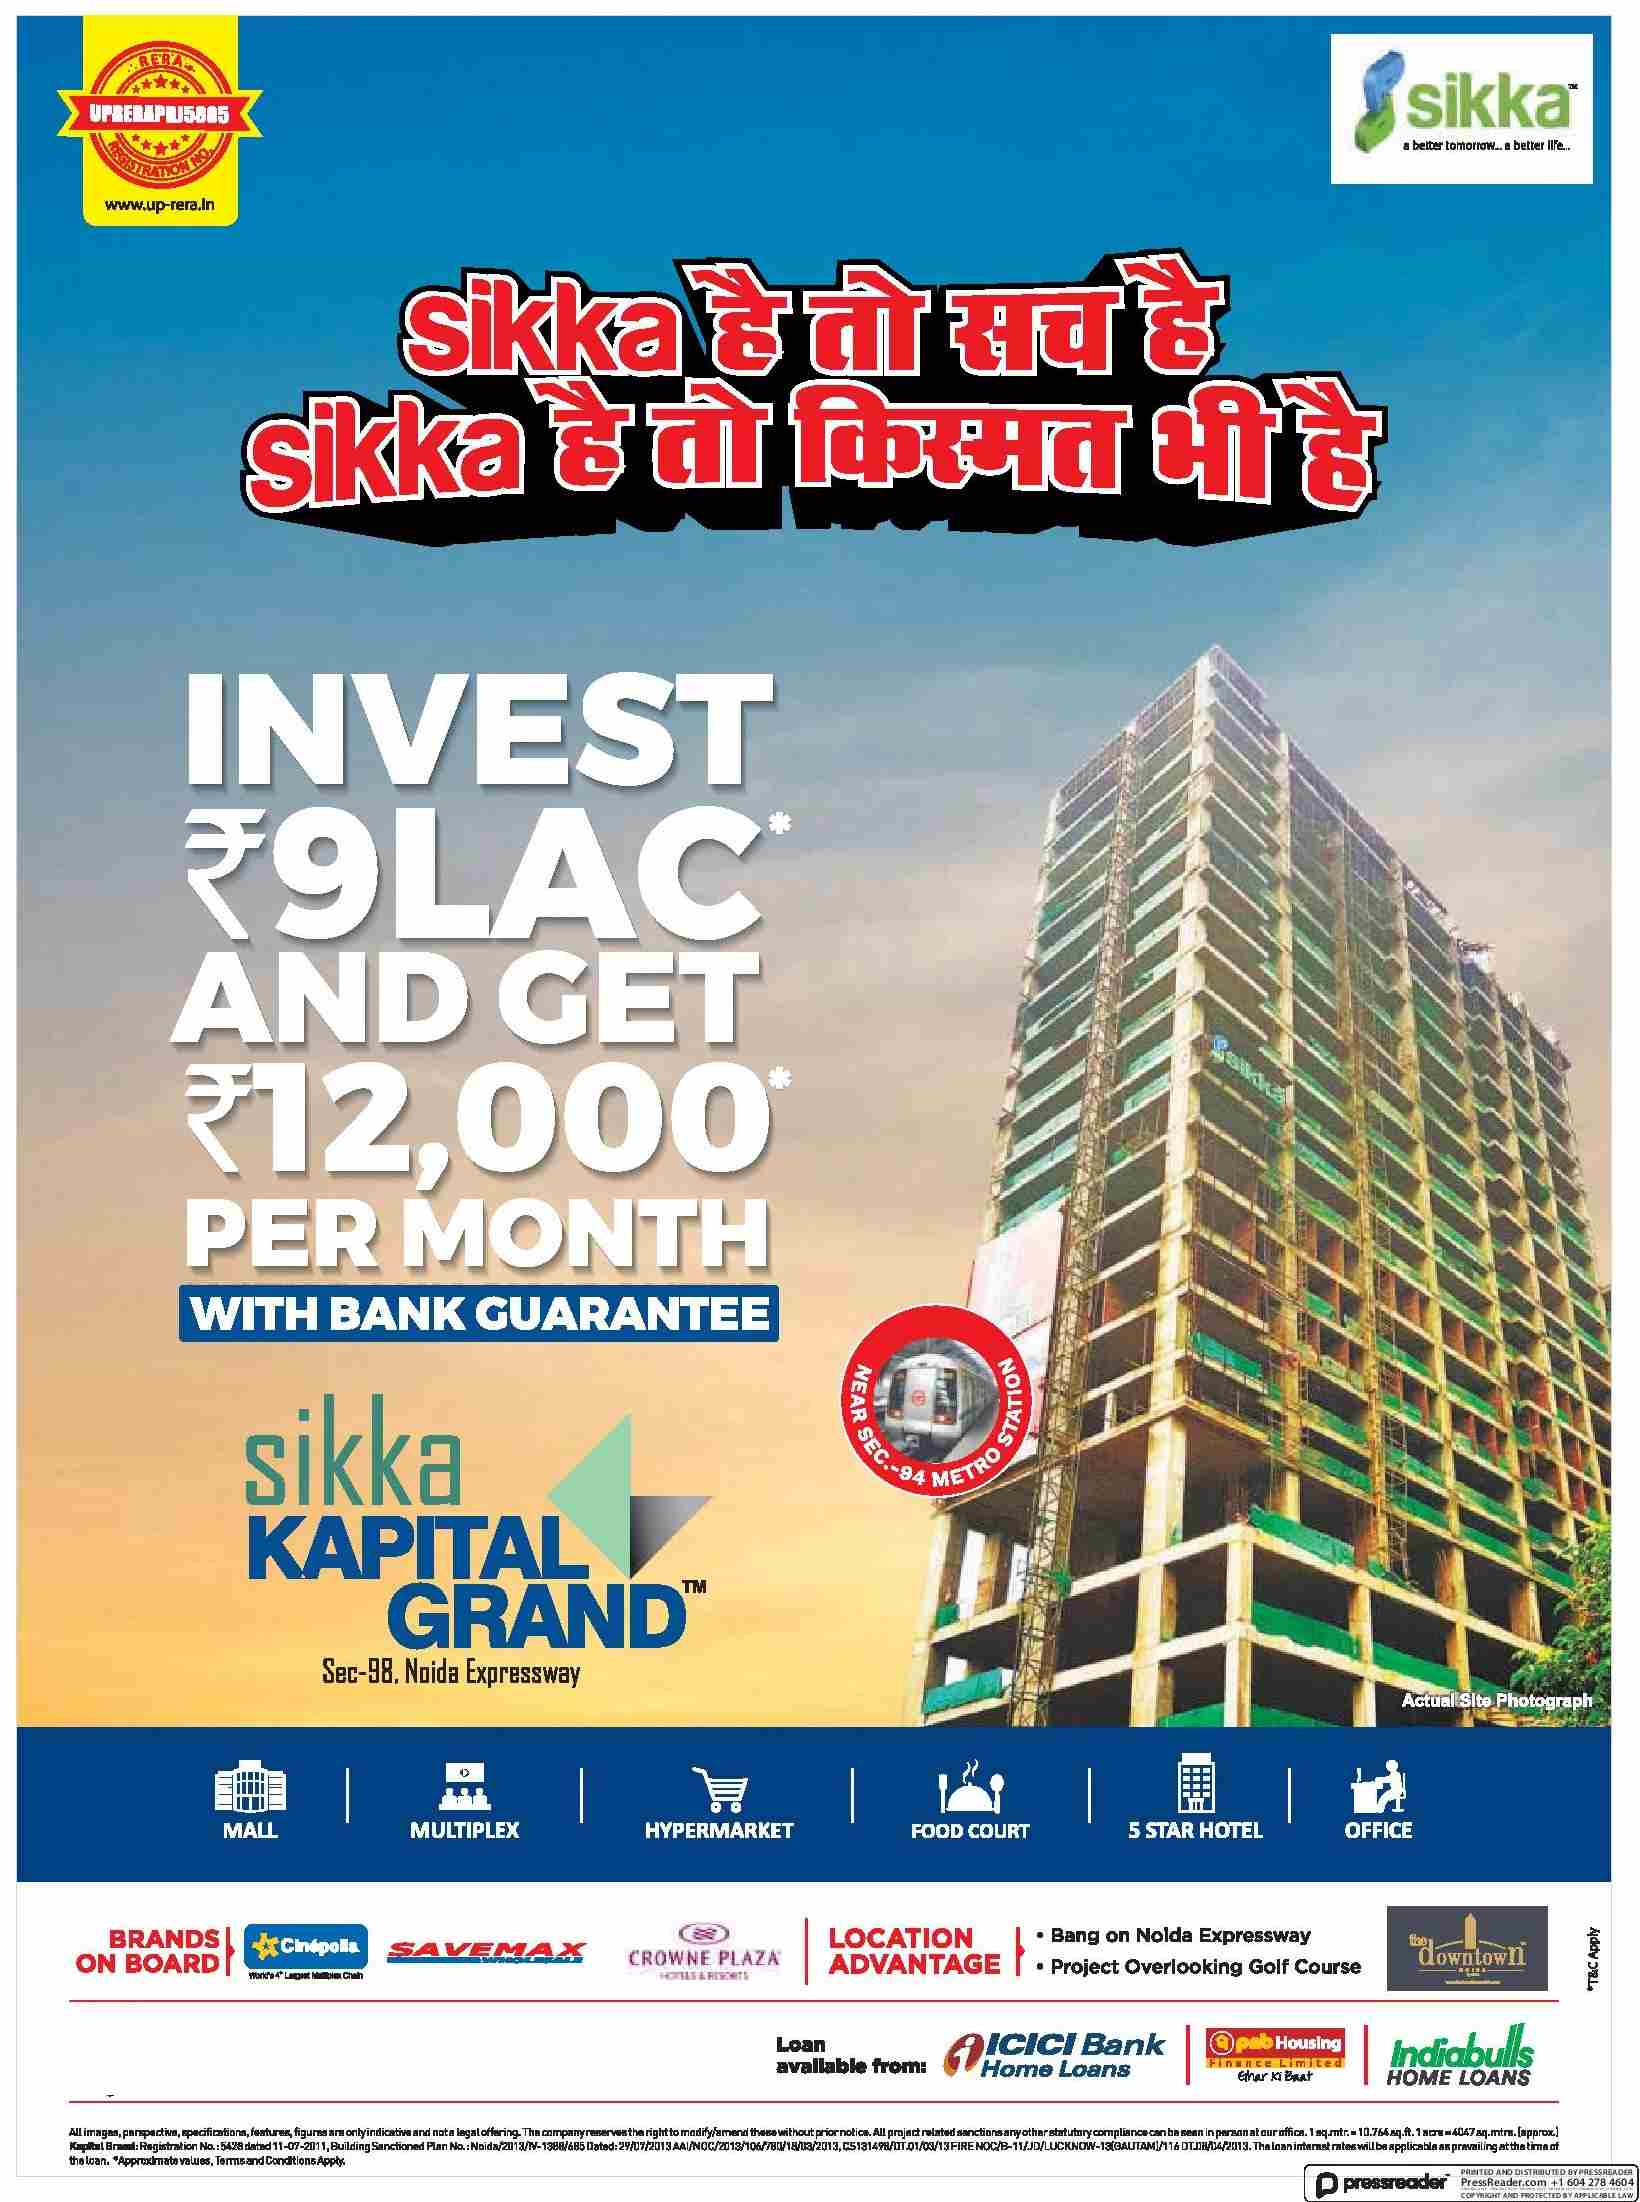 Invest Rs. 9 Lac & get Rs. 12000 per month at Sikka The Downtown Kapital Grand in Noida Update